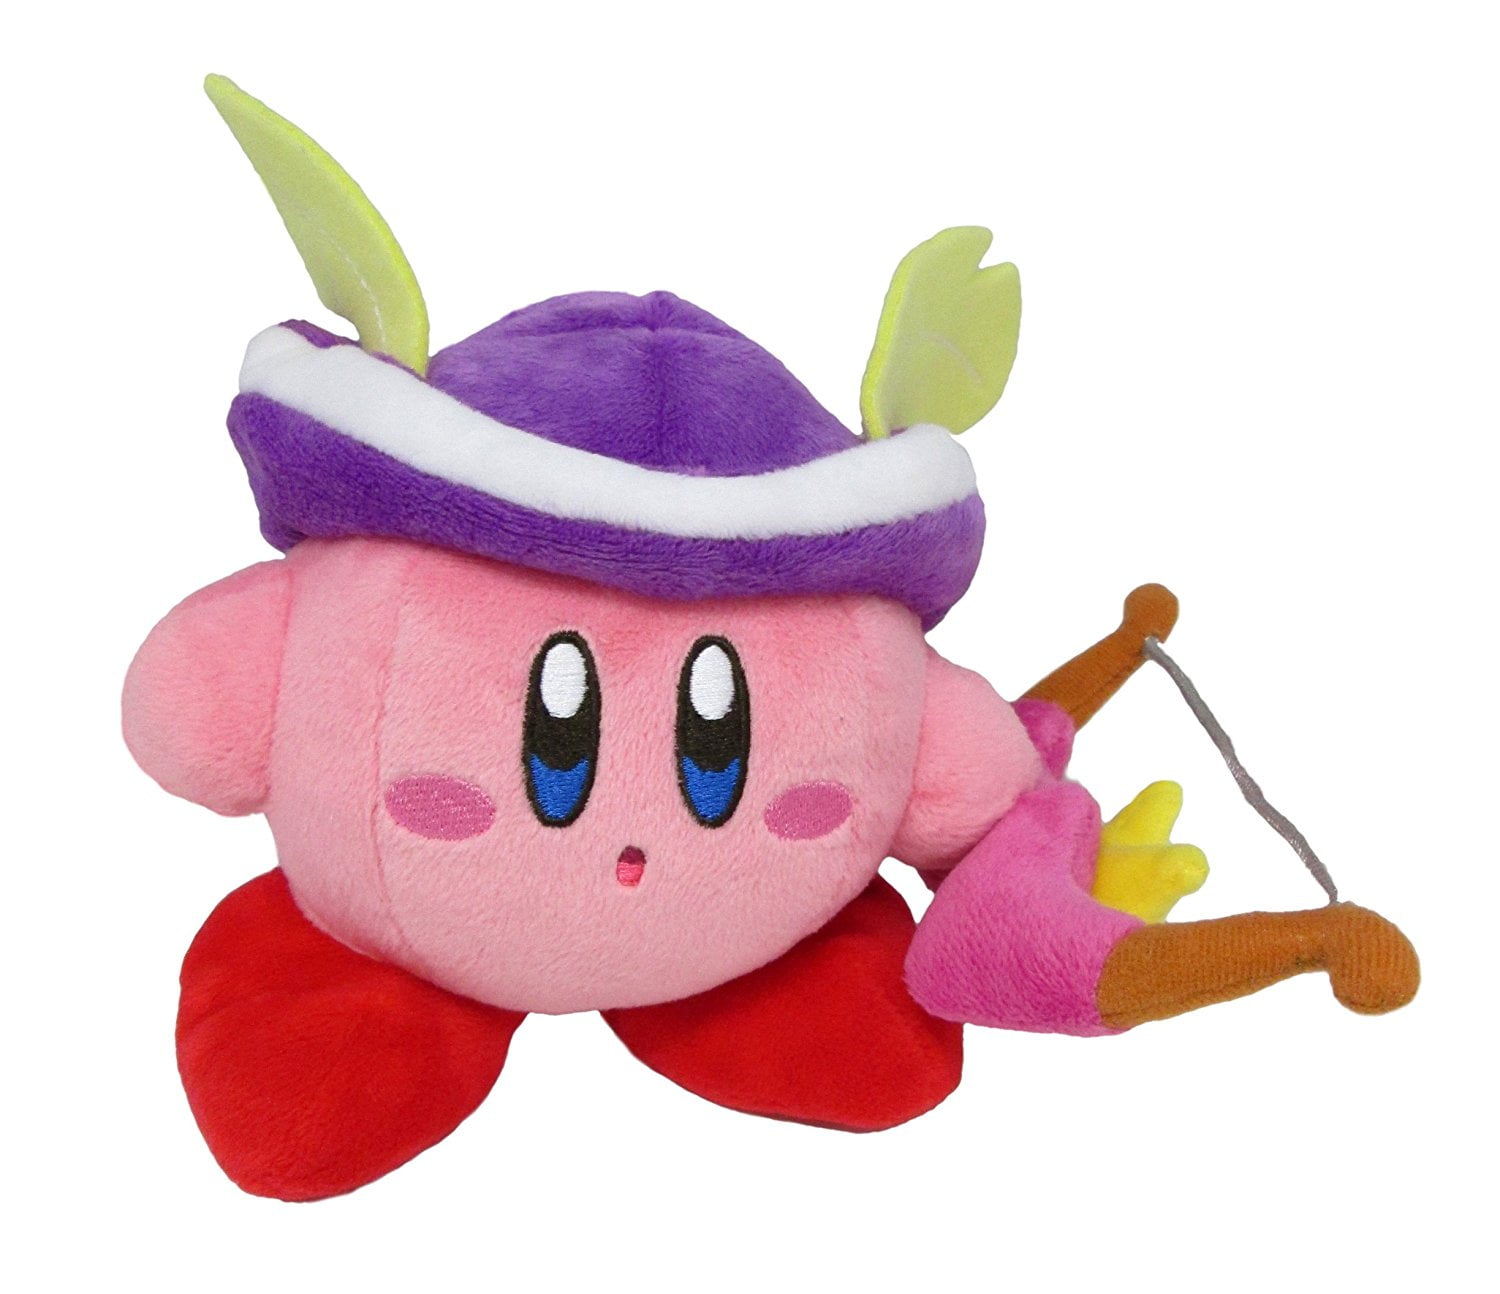 Kirby ANIMAL 6" Plush Exclusive NEW TOY-001323 Little Buddy Kirby Adventure 